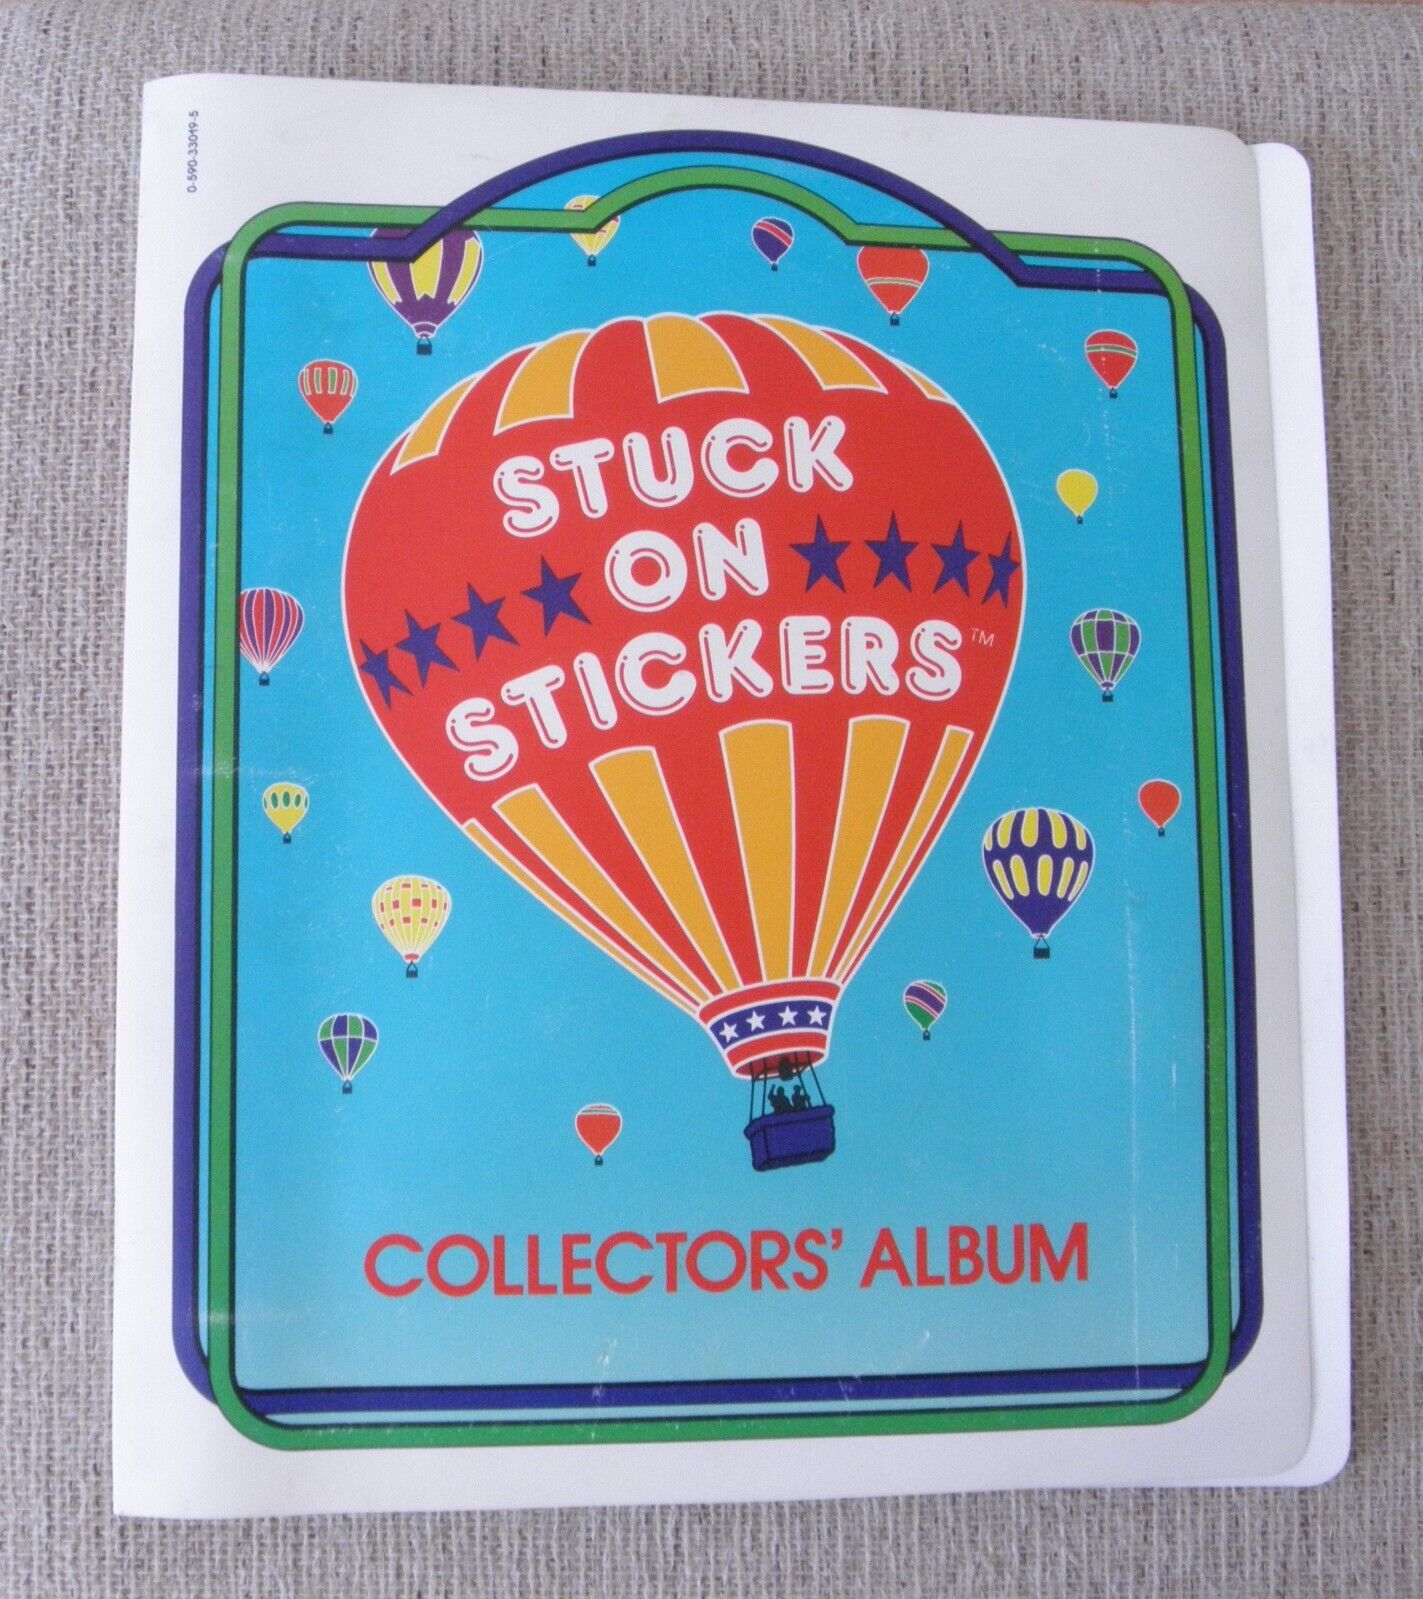 Vintage 1983 “Stuck On Stickers” Collector’s Album With Used Stickers